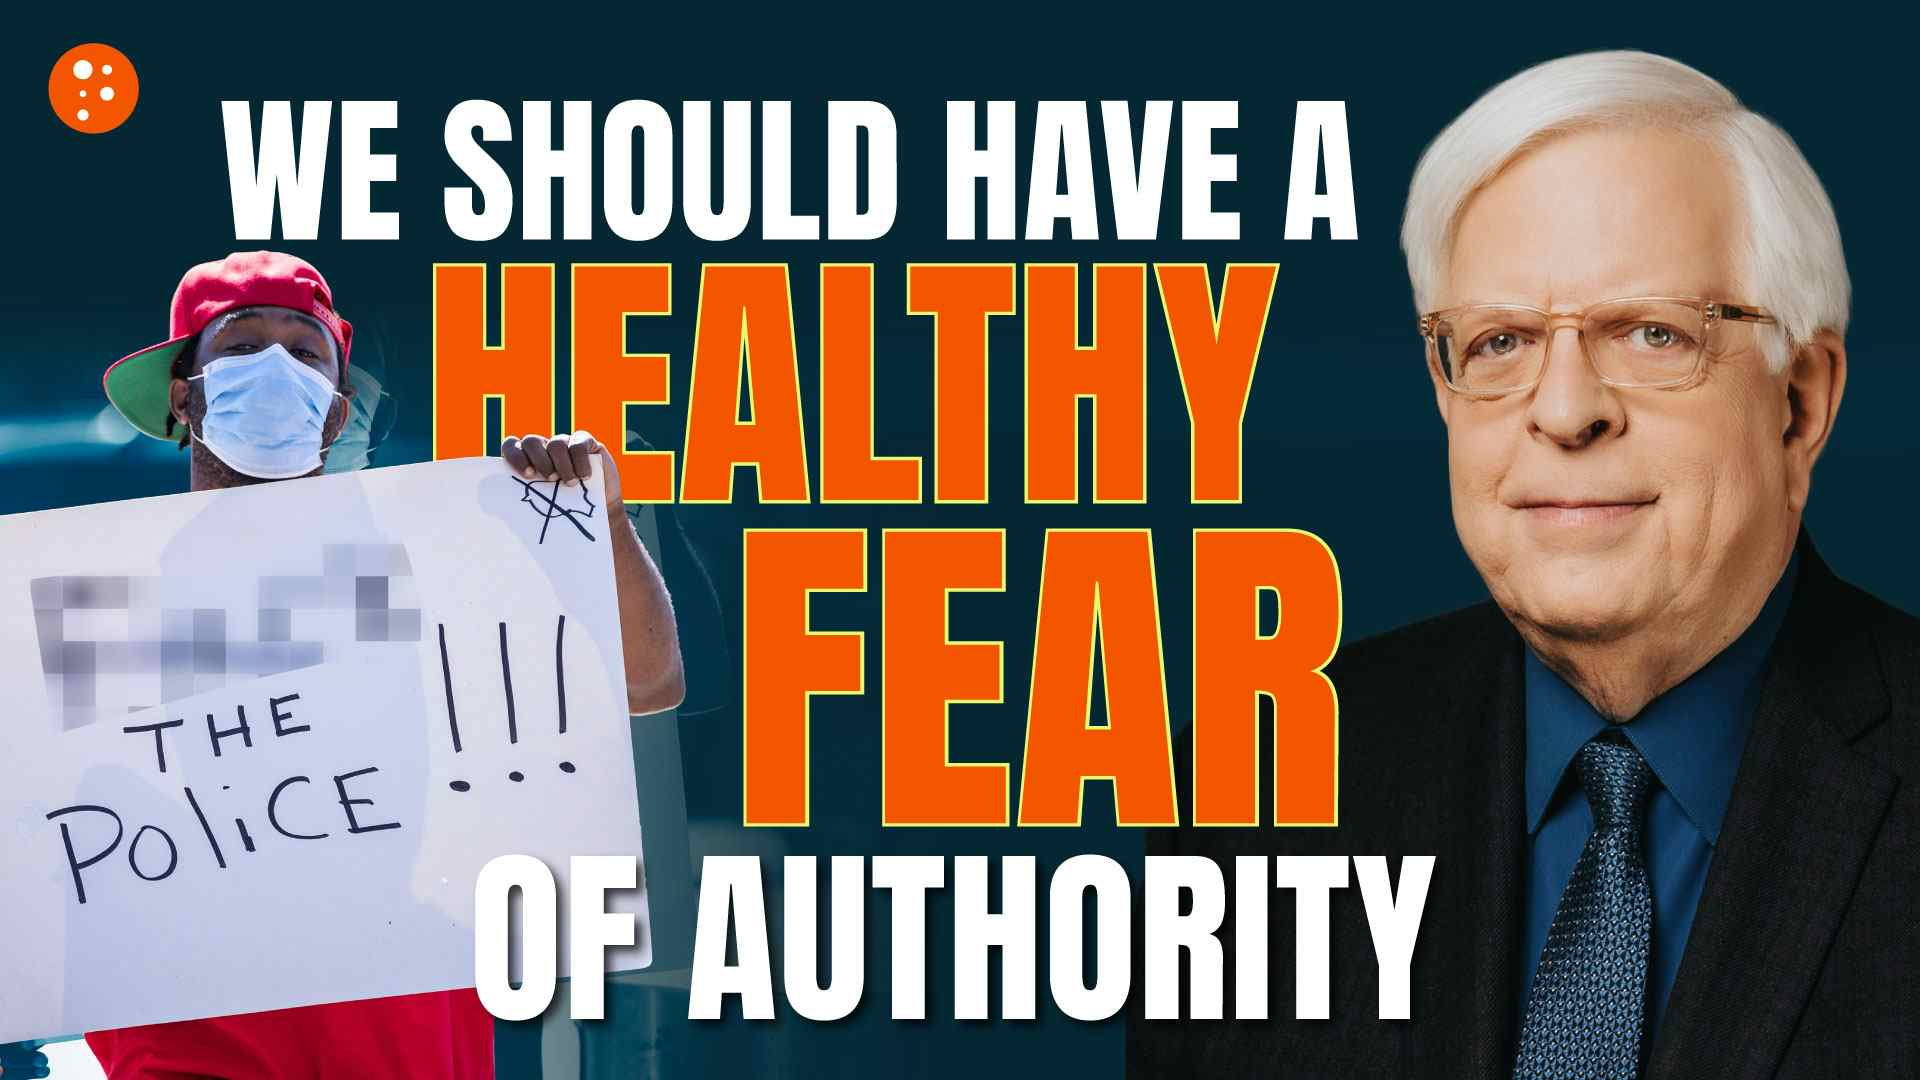 We Should Have a Healthy Fear of Authority